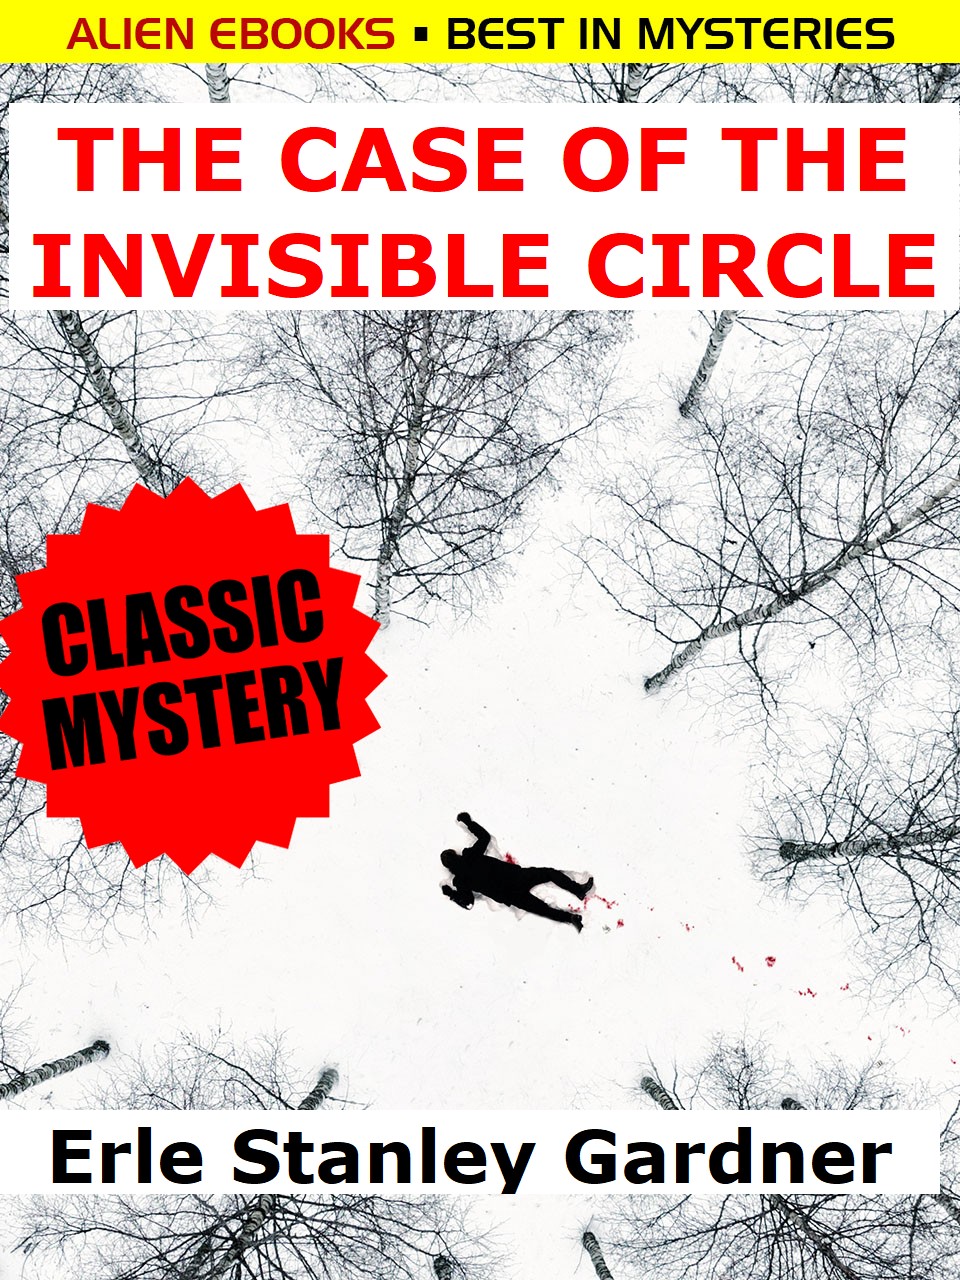 The Case of the Invisible Circle